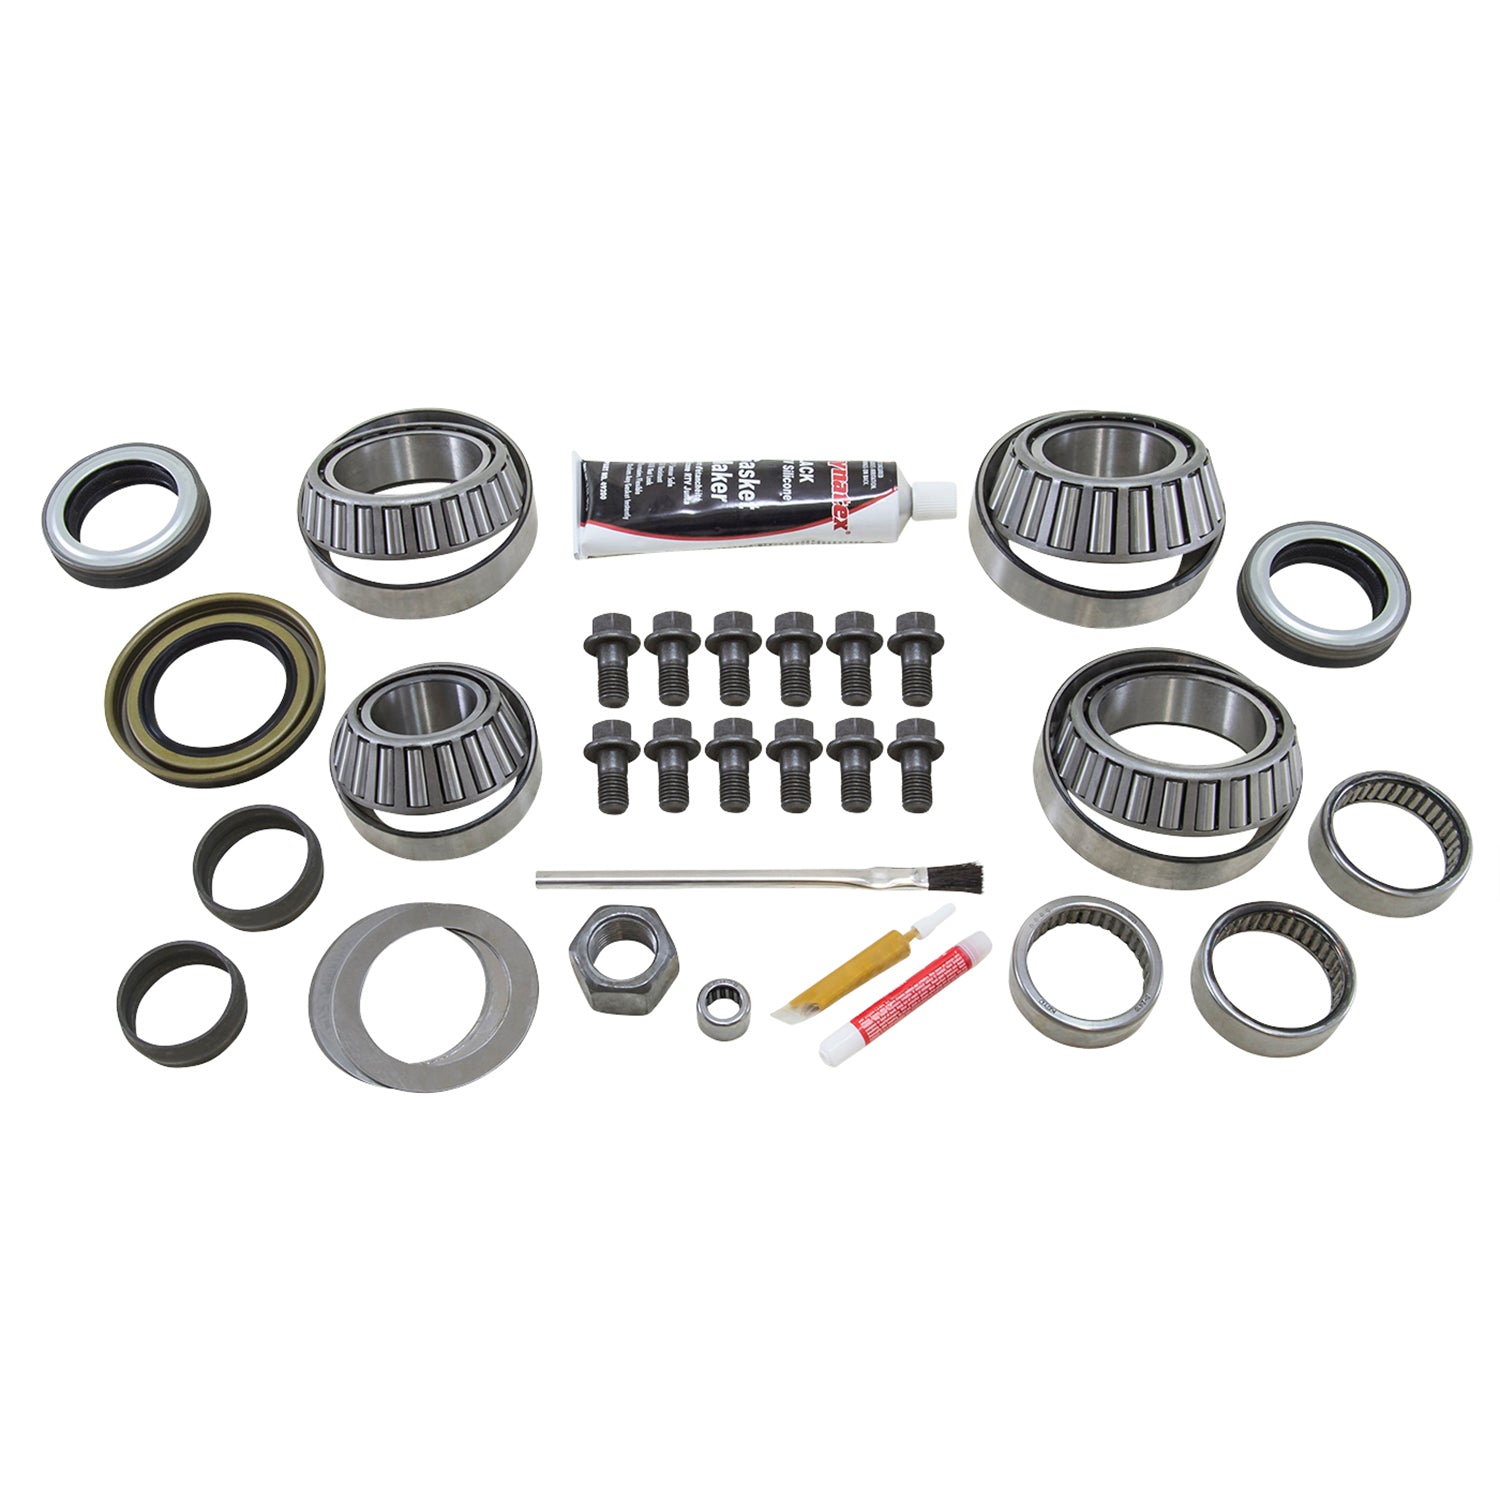 Yukon Gear 02-05 Dodge Ram 1500 (4WD) Axle Differential Bearing and Seal Kit - Front YKC8.0-IFS-C